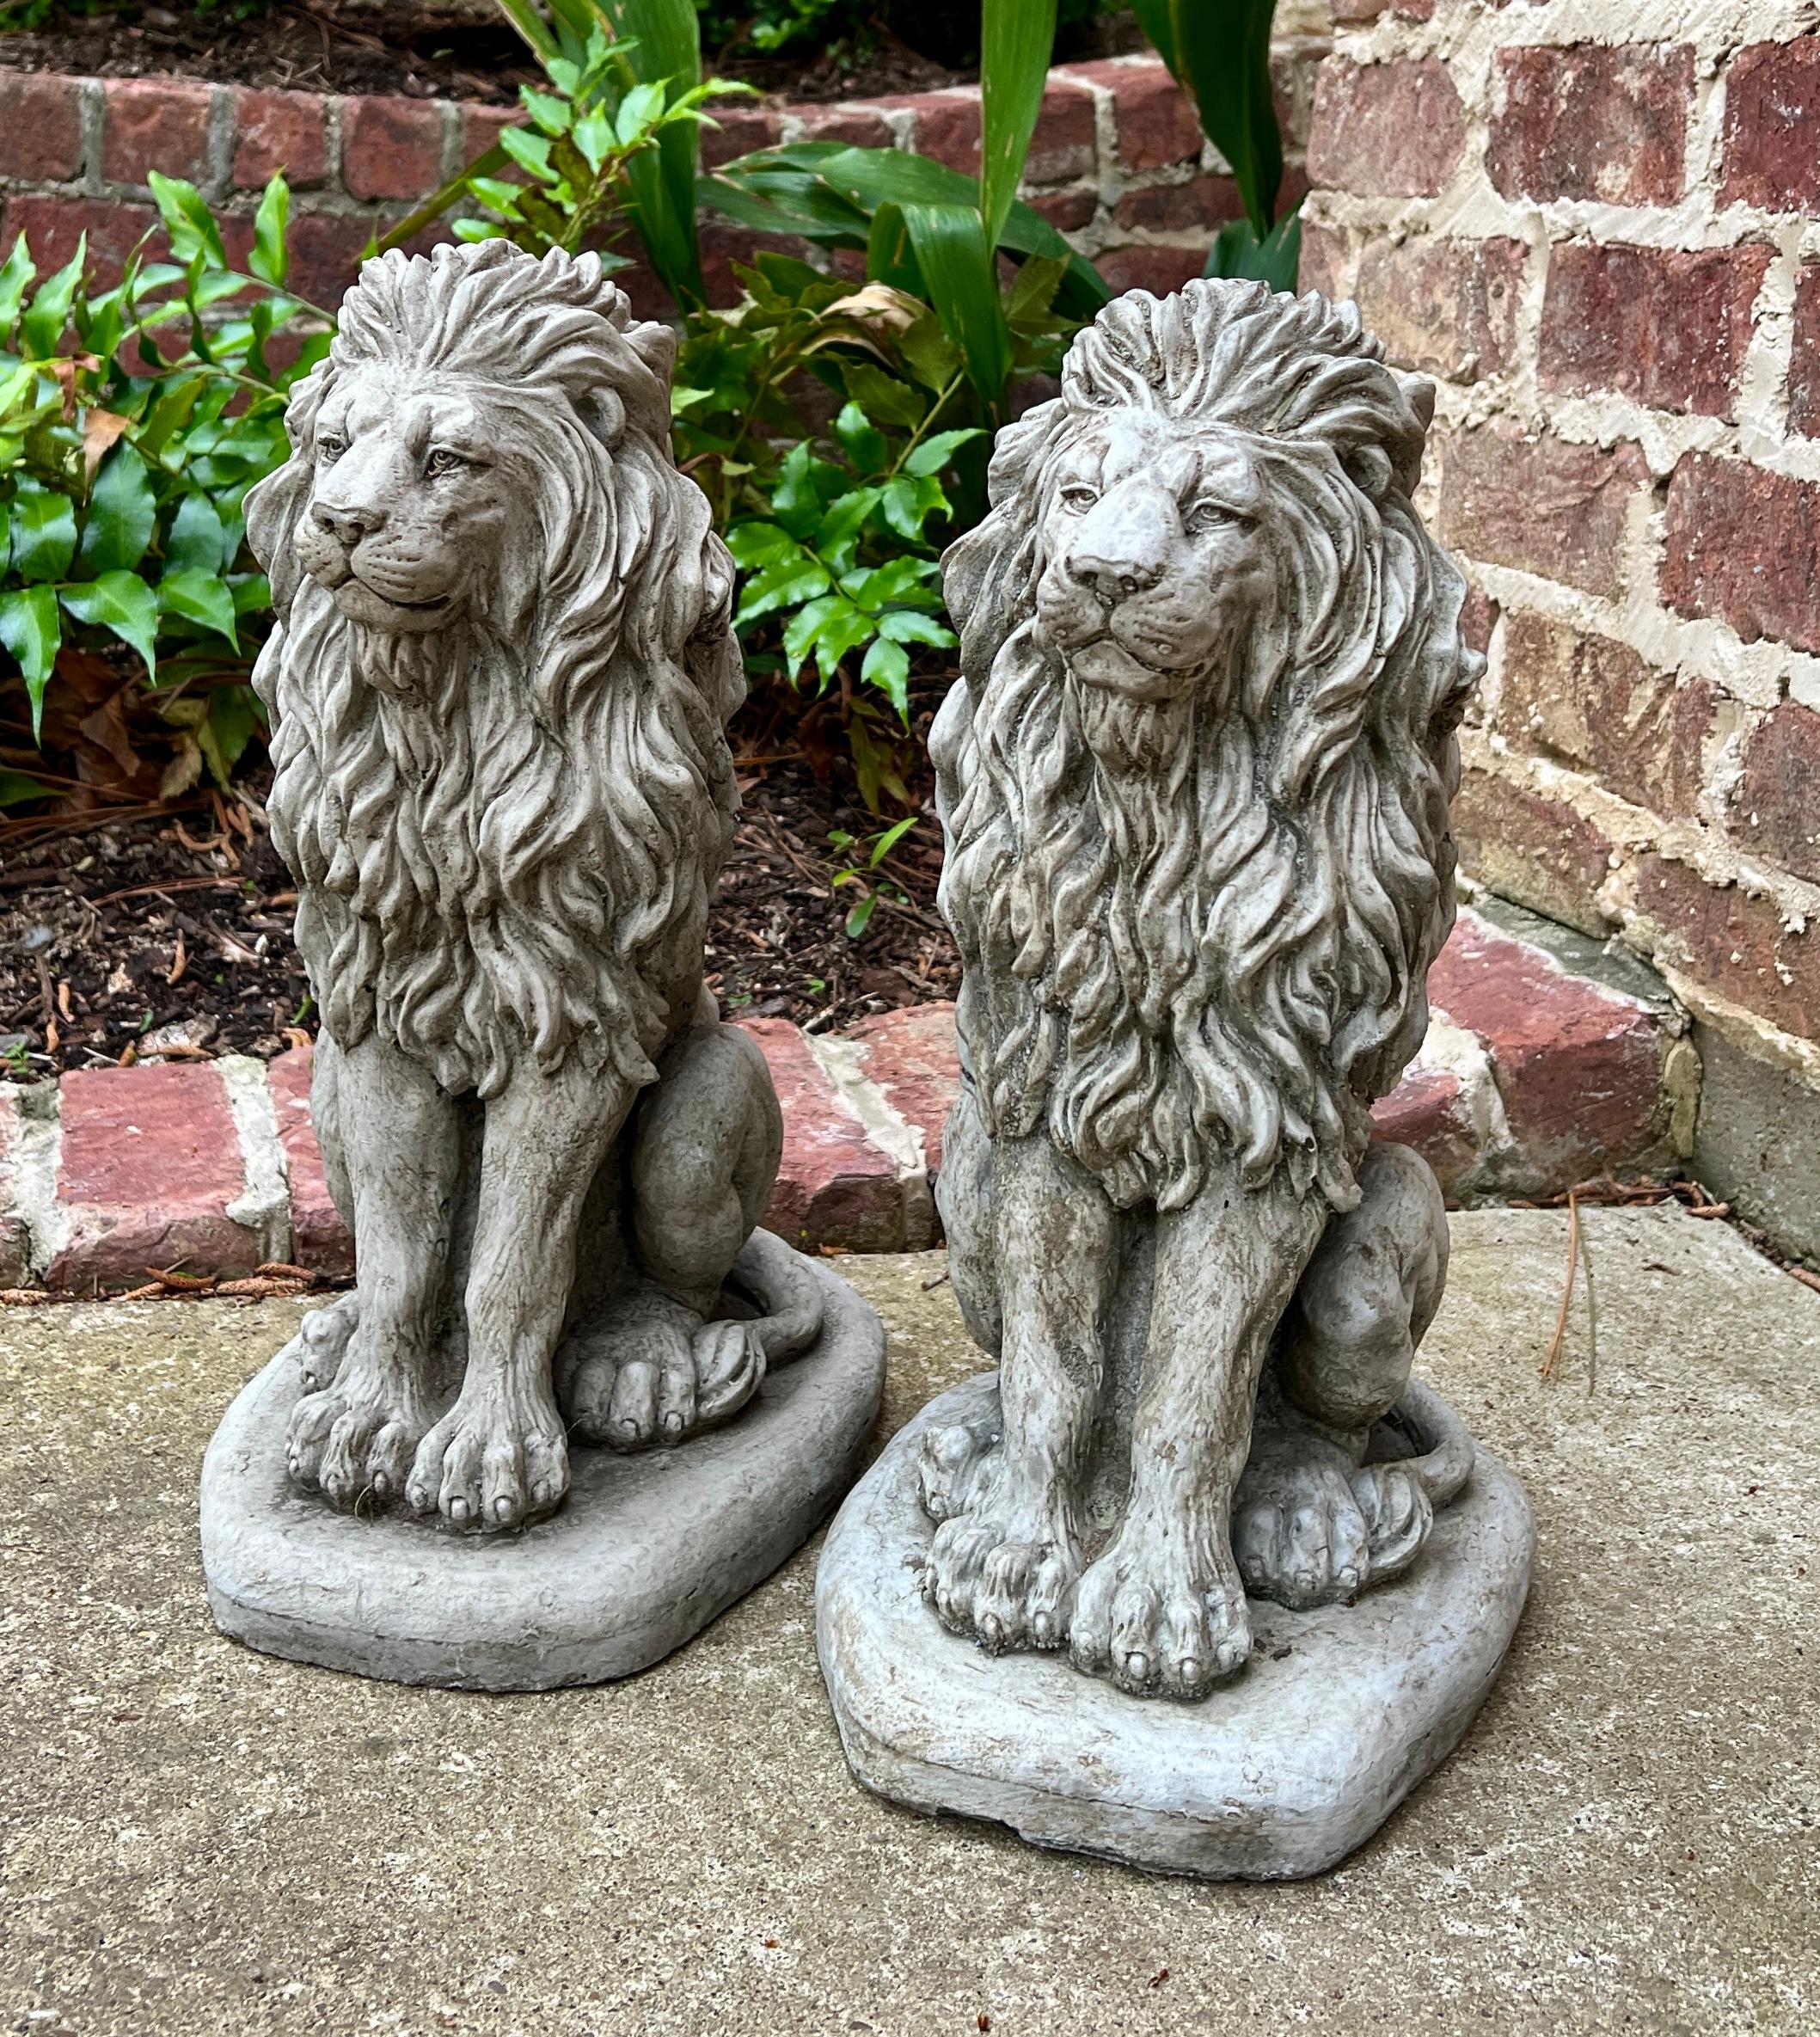 Vintage English Cast Stone Statues PAIR LIONS Garden Figures Yard Decor

Original aged patina sitting on oval base

The perfect accent piece or focal point in an entryway, garden, yard, flower bed, or sunroom

Each lion is 16